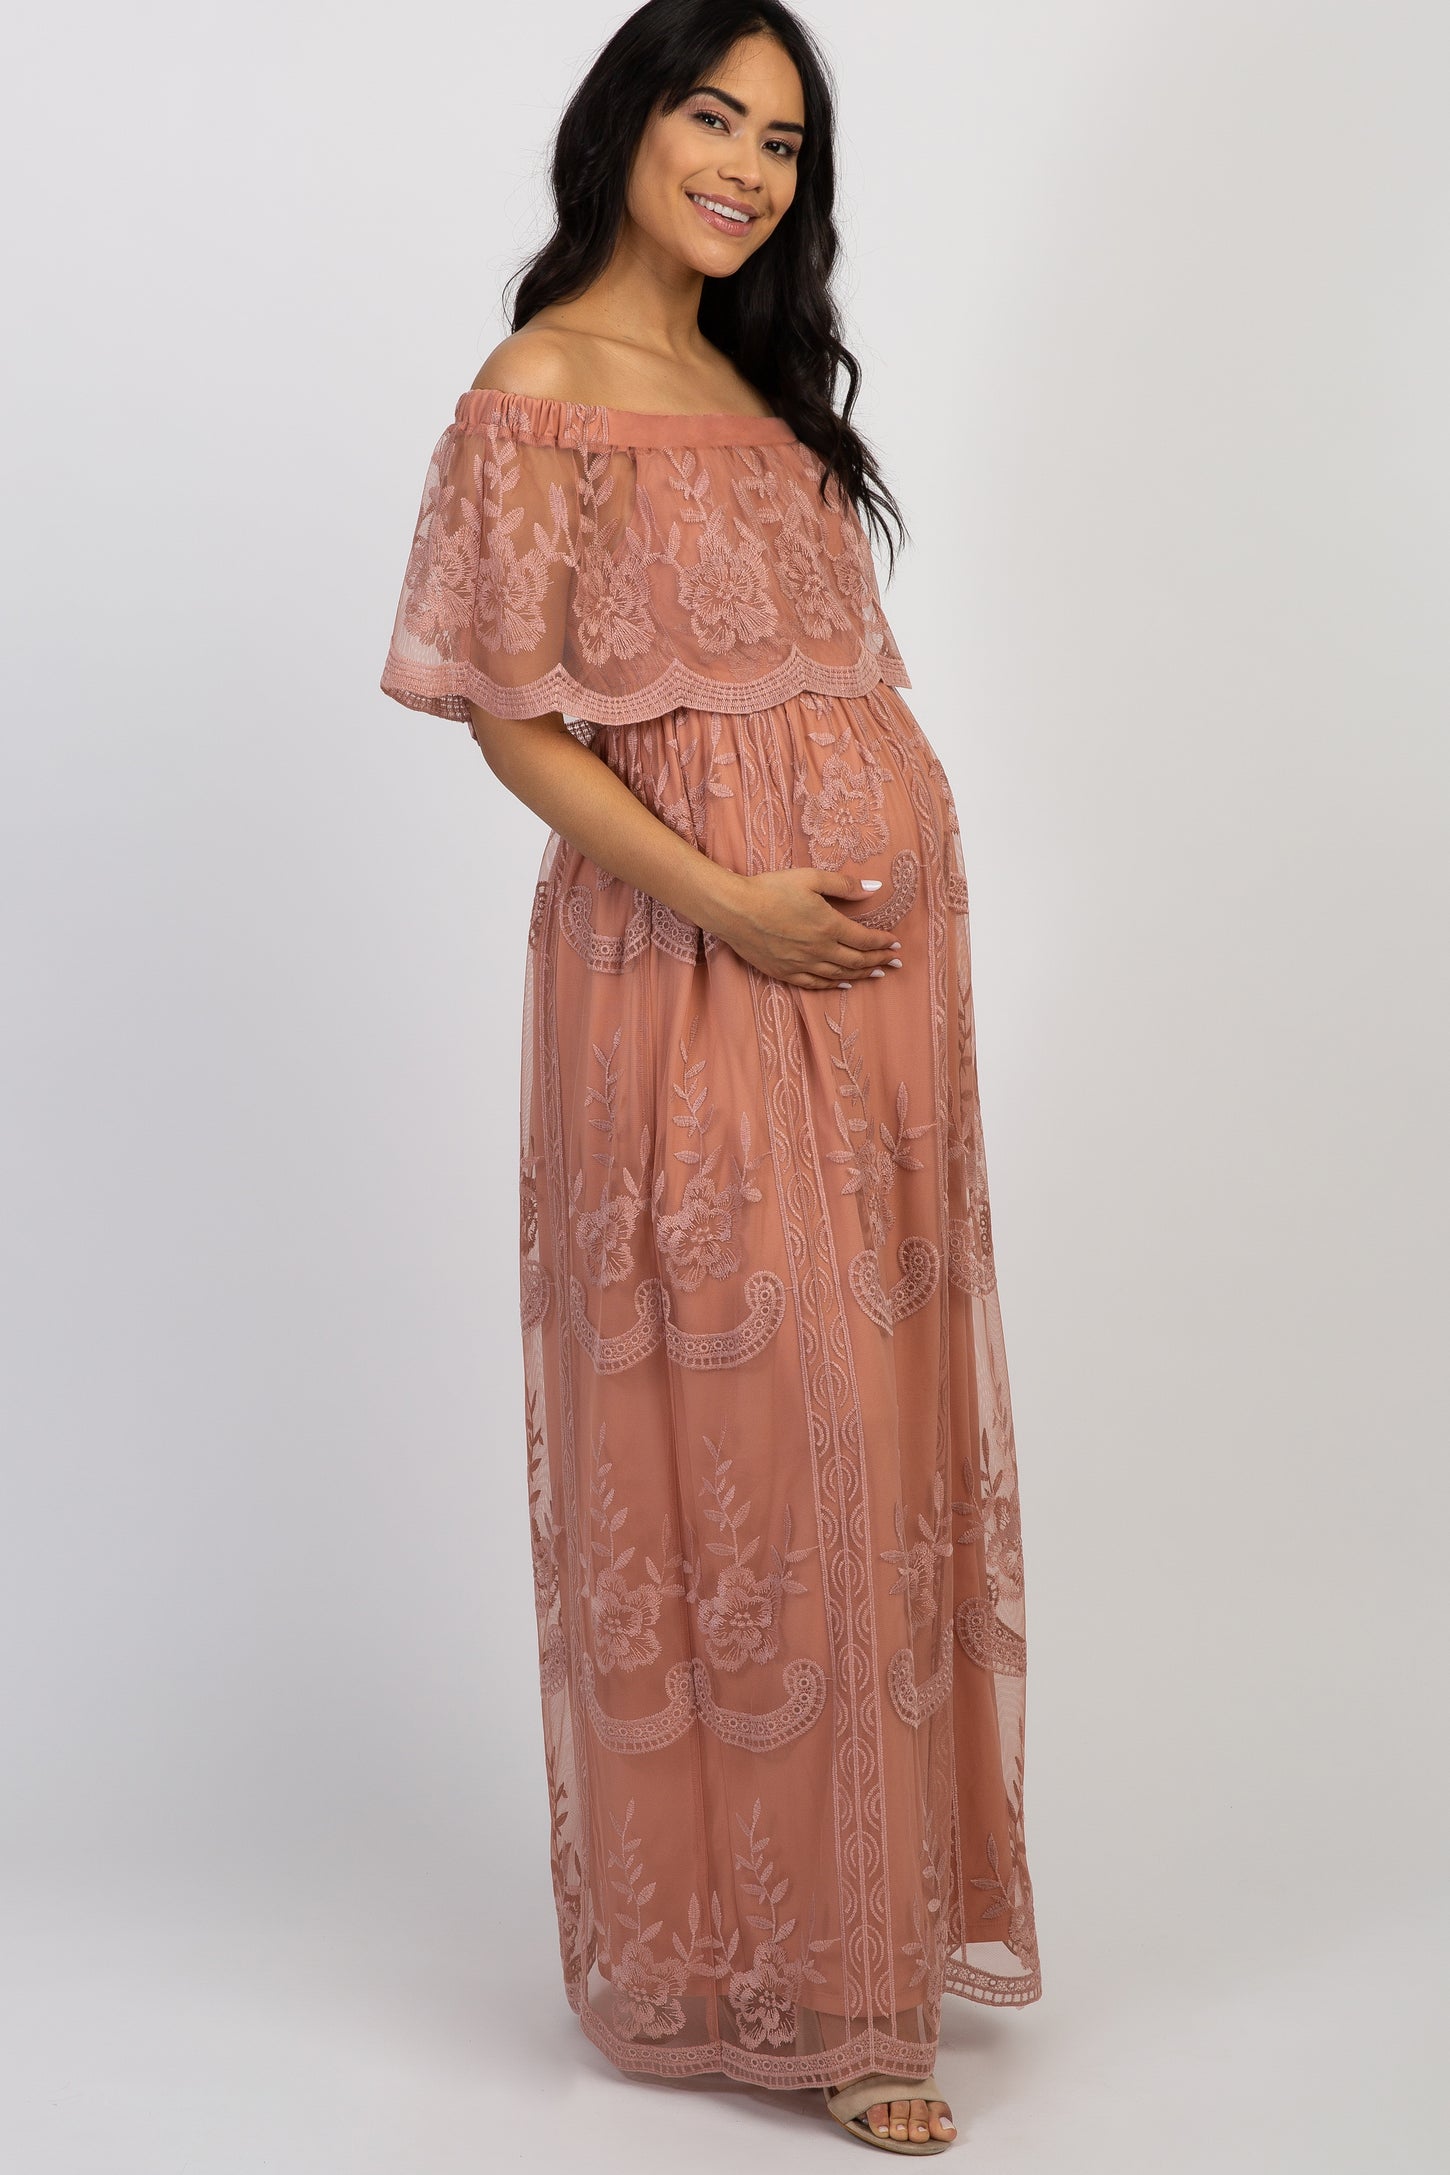 Light Pink Lace Mesh Overlay Off Shoulder Maternity Maxi Dress